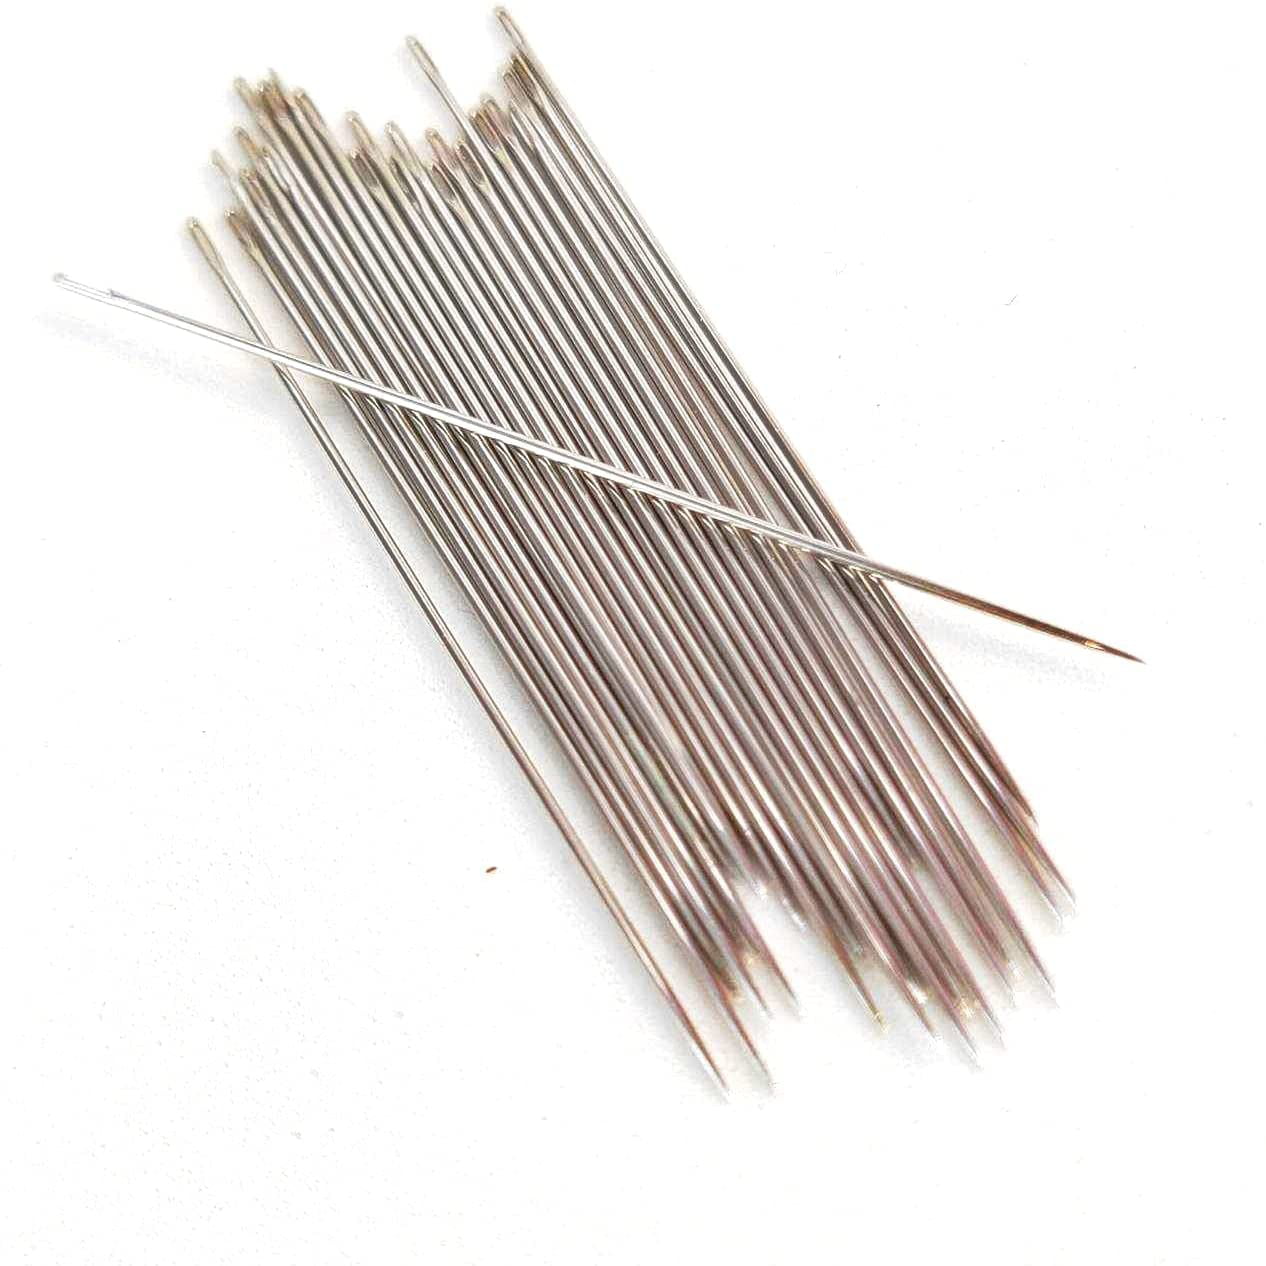 25-75X Large Eye Hand Sewing Needles 5 Size for Stitching Leather